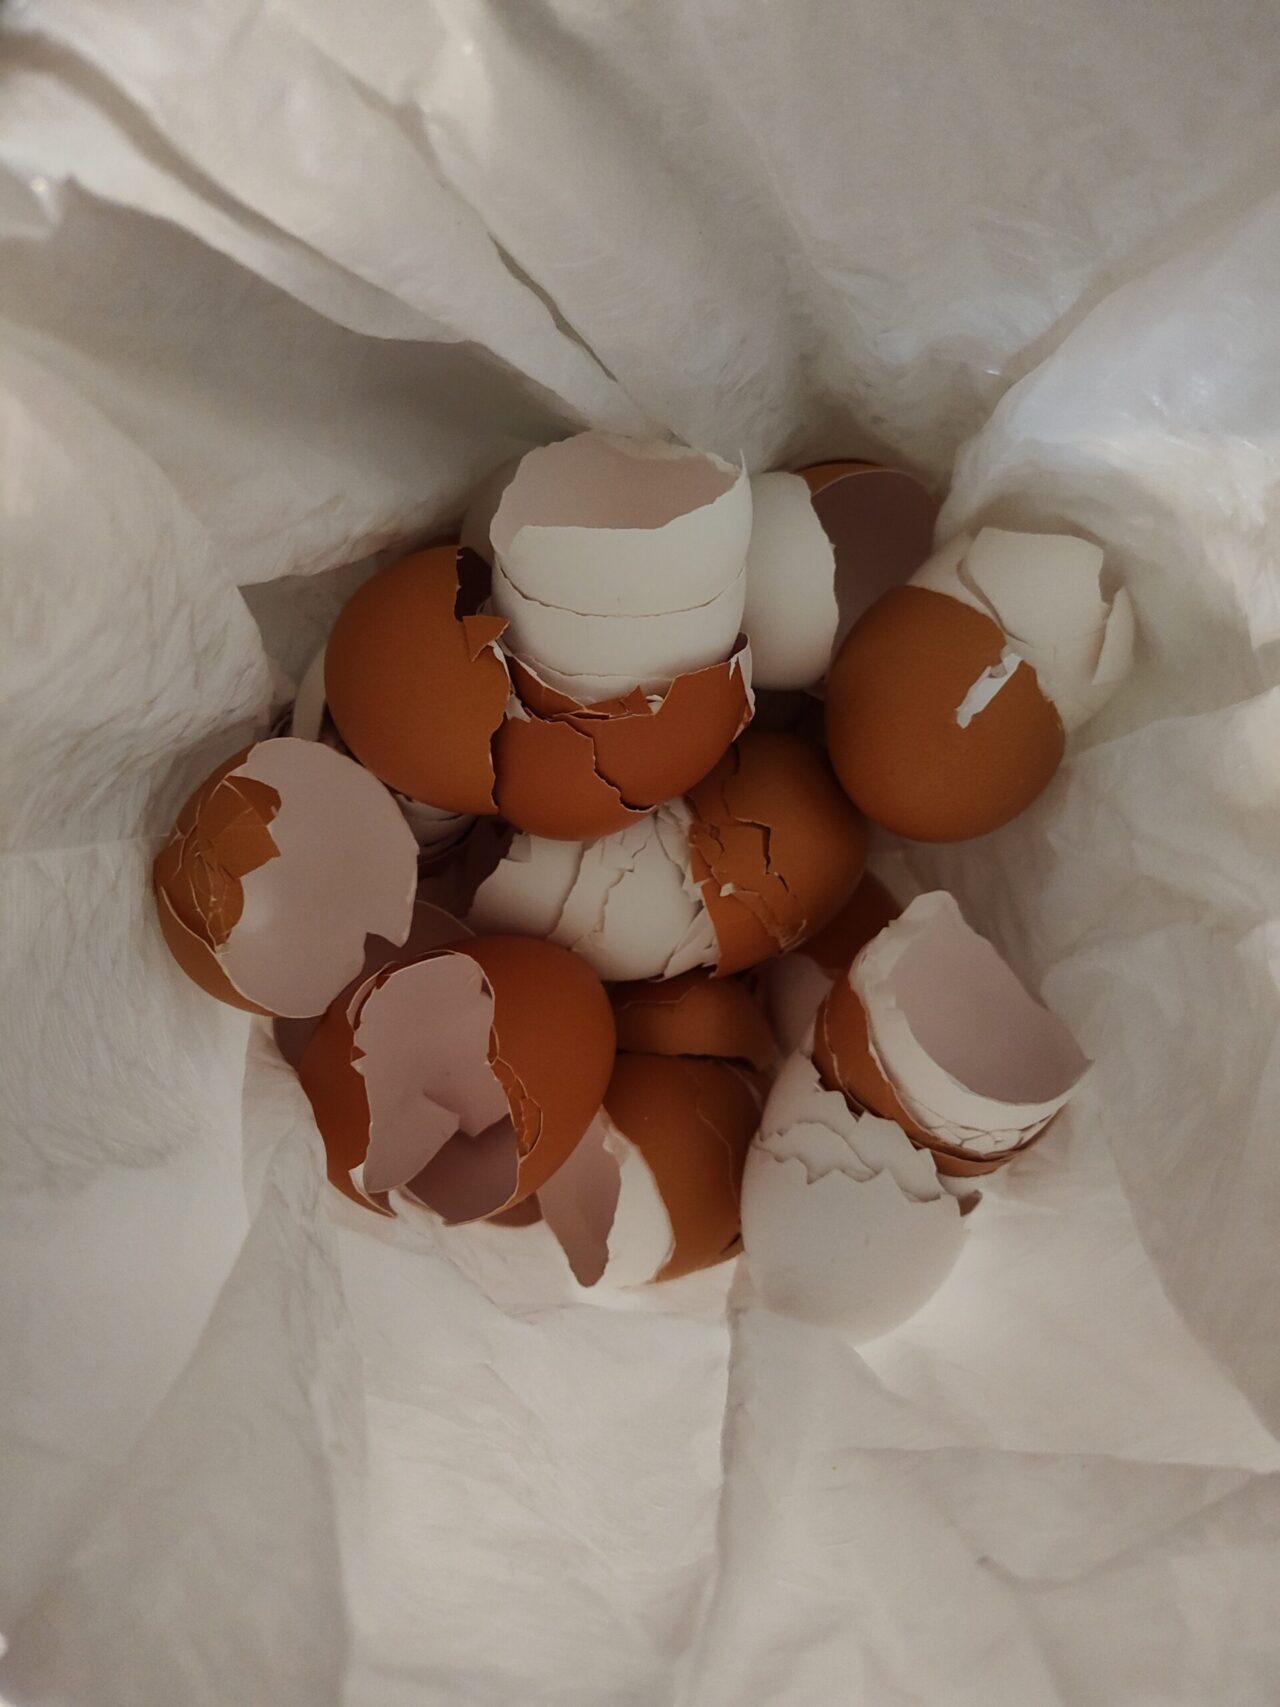 Brown and White eggshells in a white plastic trash can